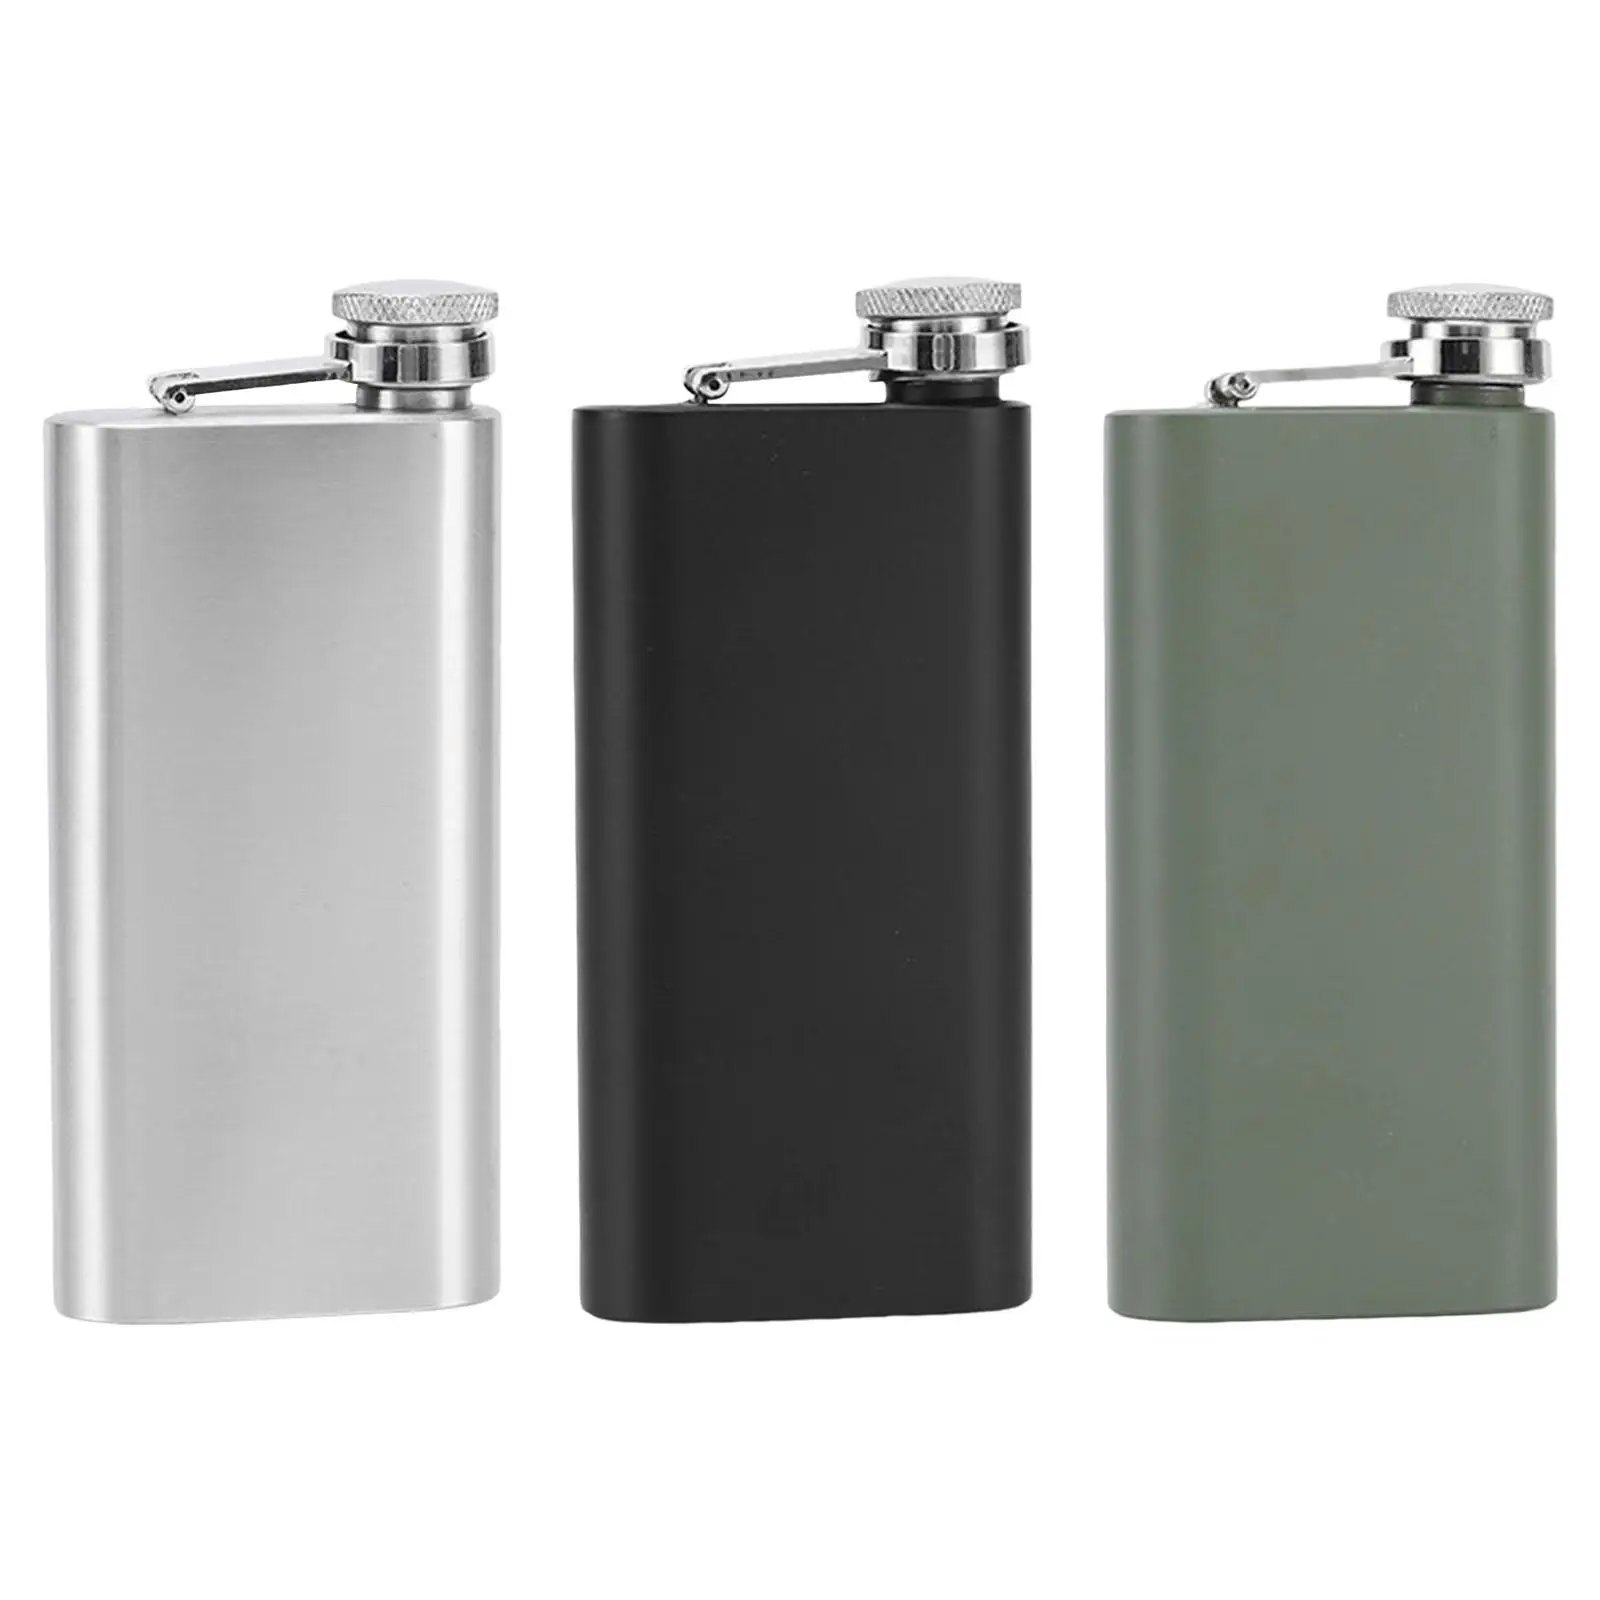 140ml Drinking Bottle Leakproof Stainless Steel liquid Flagon Portable Drink Pocket for Outgoing Hiking Wedding Hunting